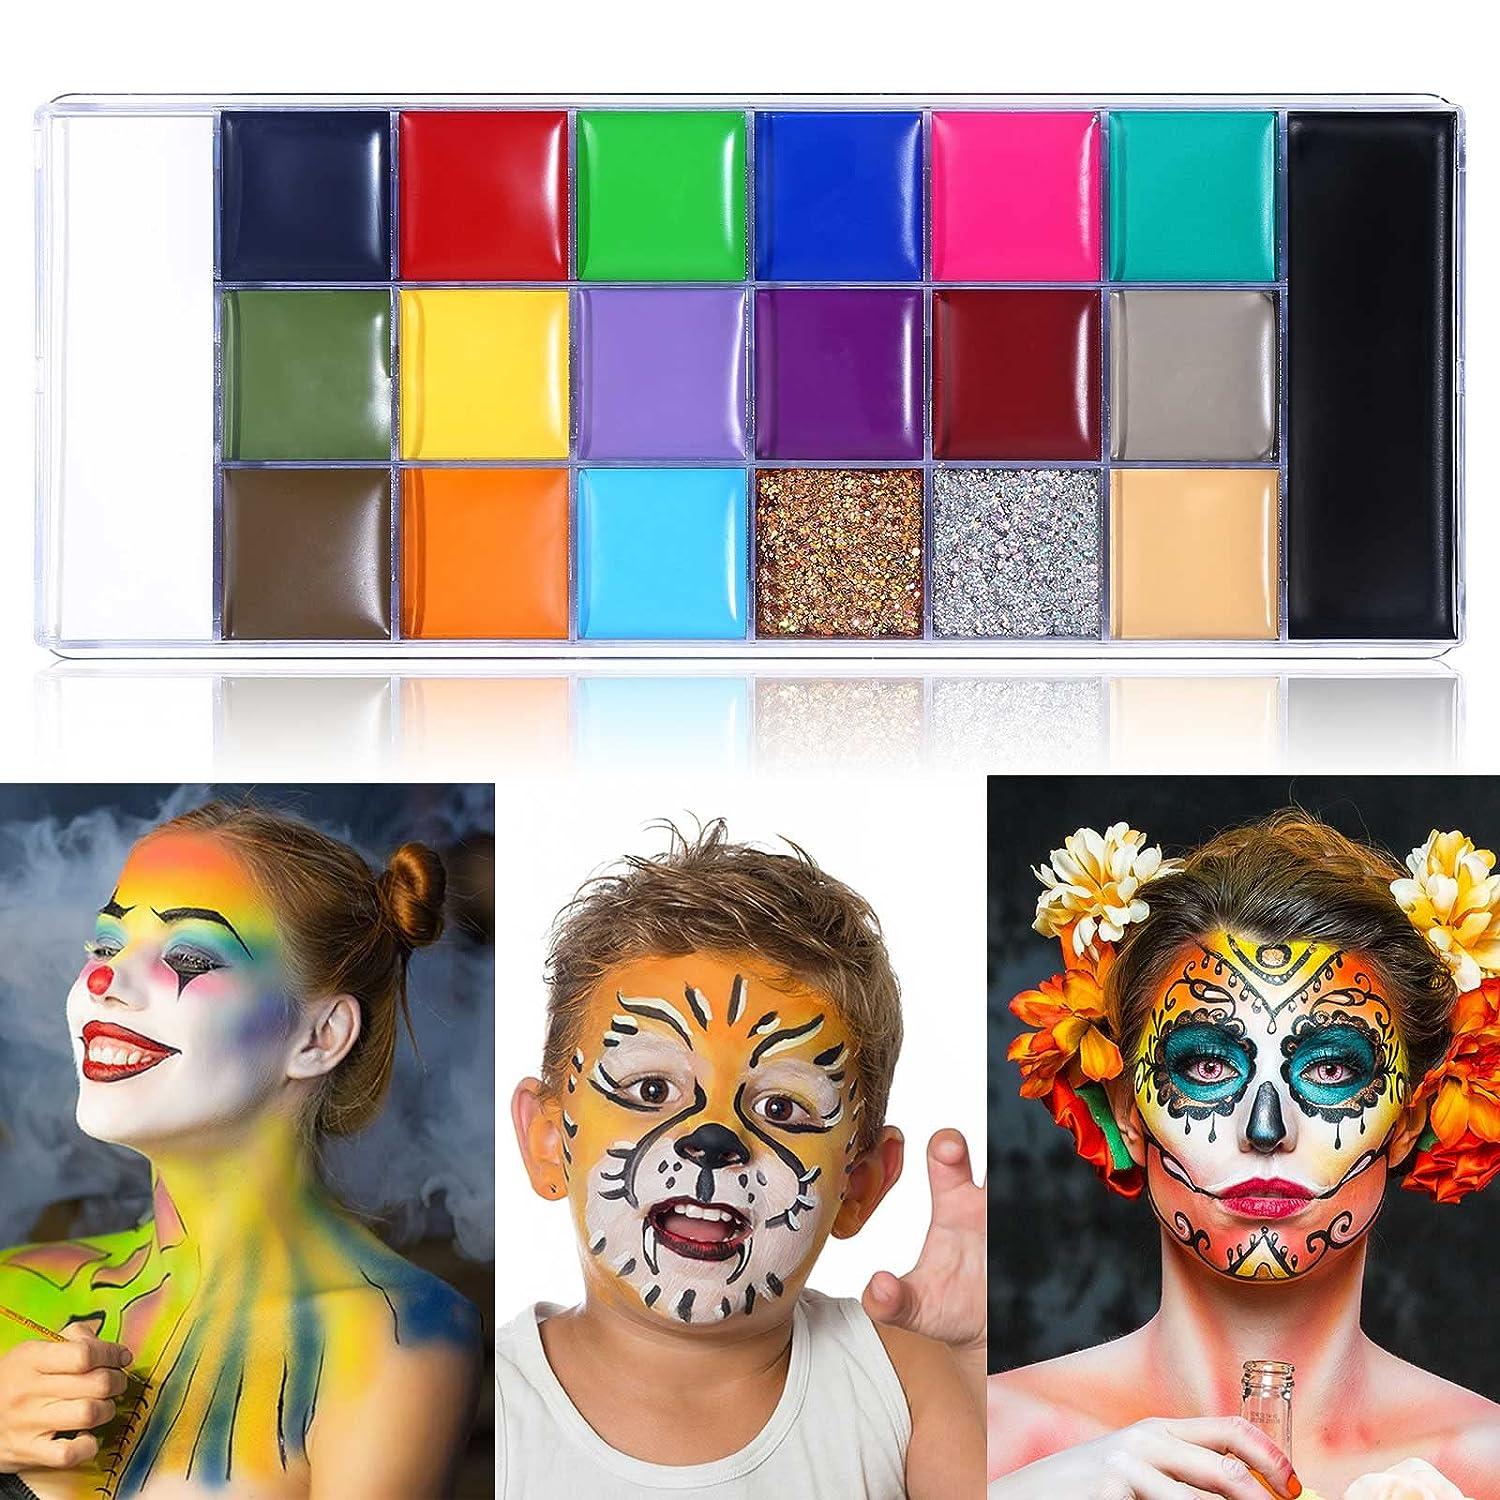 Athena Face Body Paint Oil Makeup Set, 20 Colors FX Halloween Party  Painting with Mixing Palette and Brushes, Tattoo Stencil Arts Crafts Kit  for Face